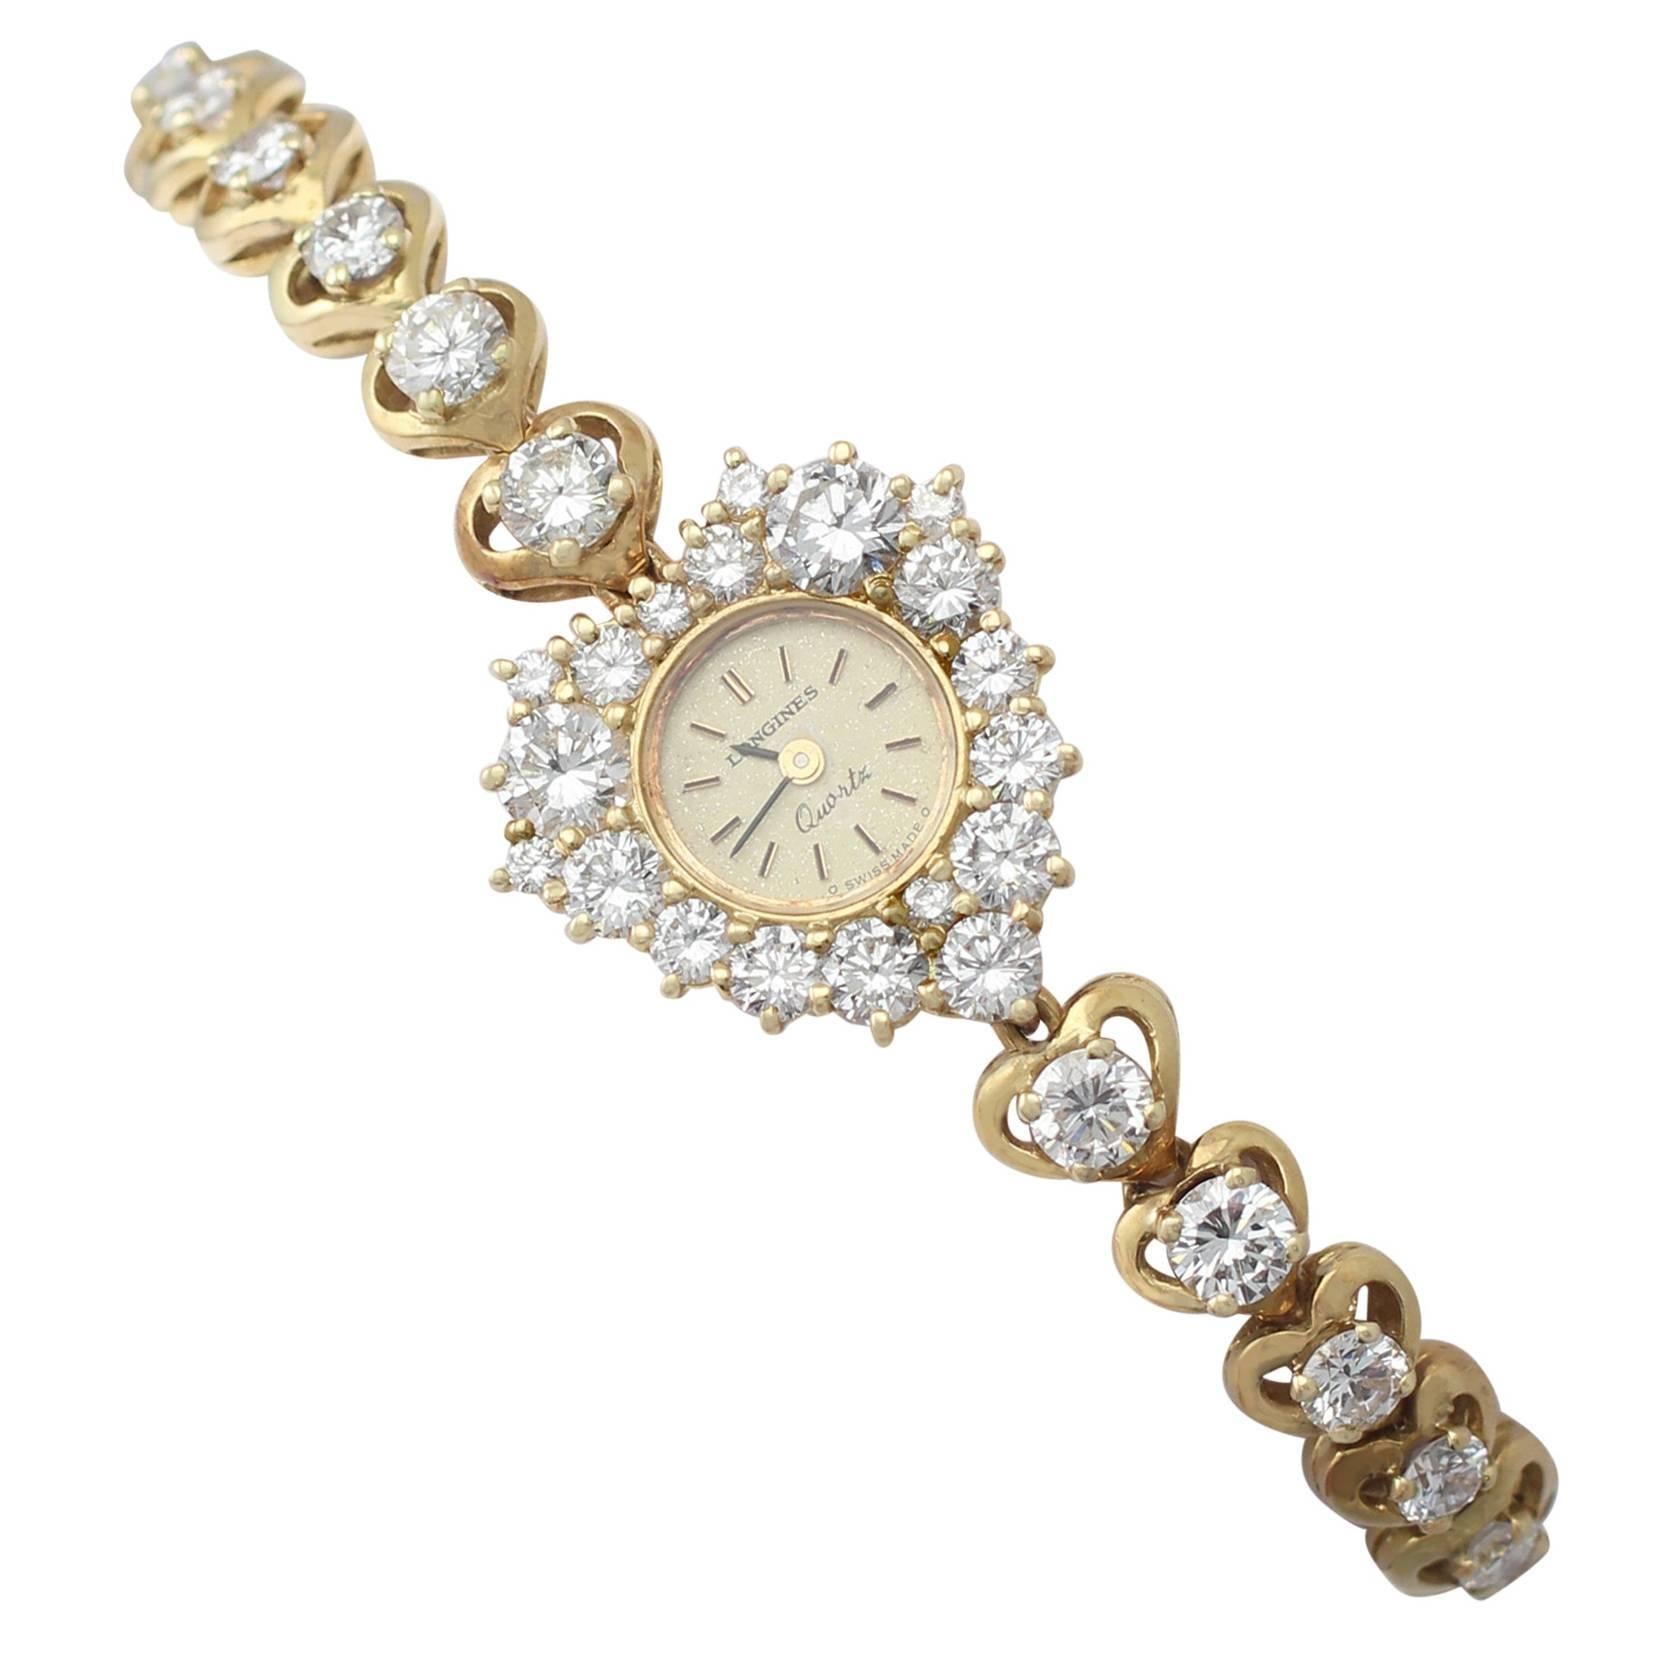 7.00Ct Diamond and 18k Yellow Gold 'Longines' Cocktail Watch - Contemporary